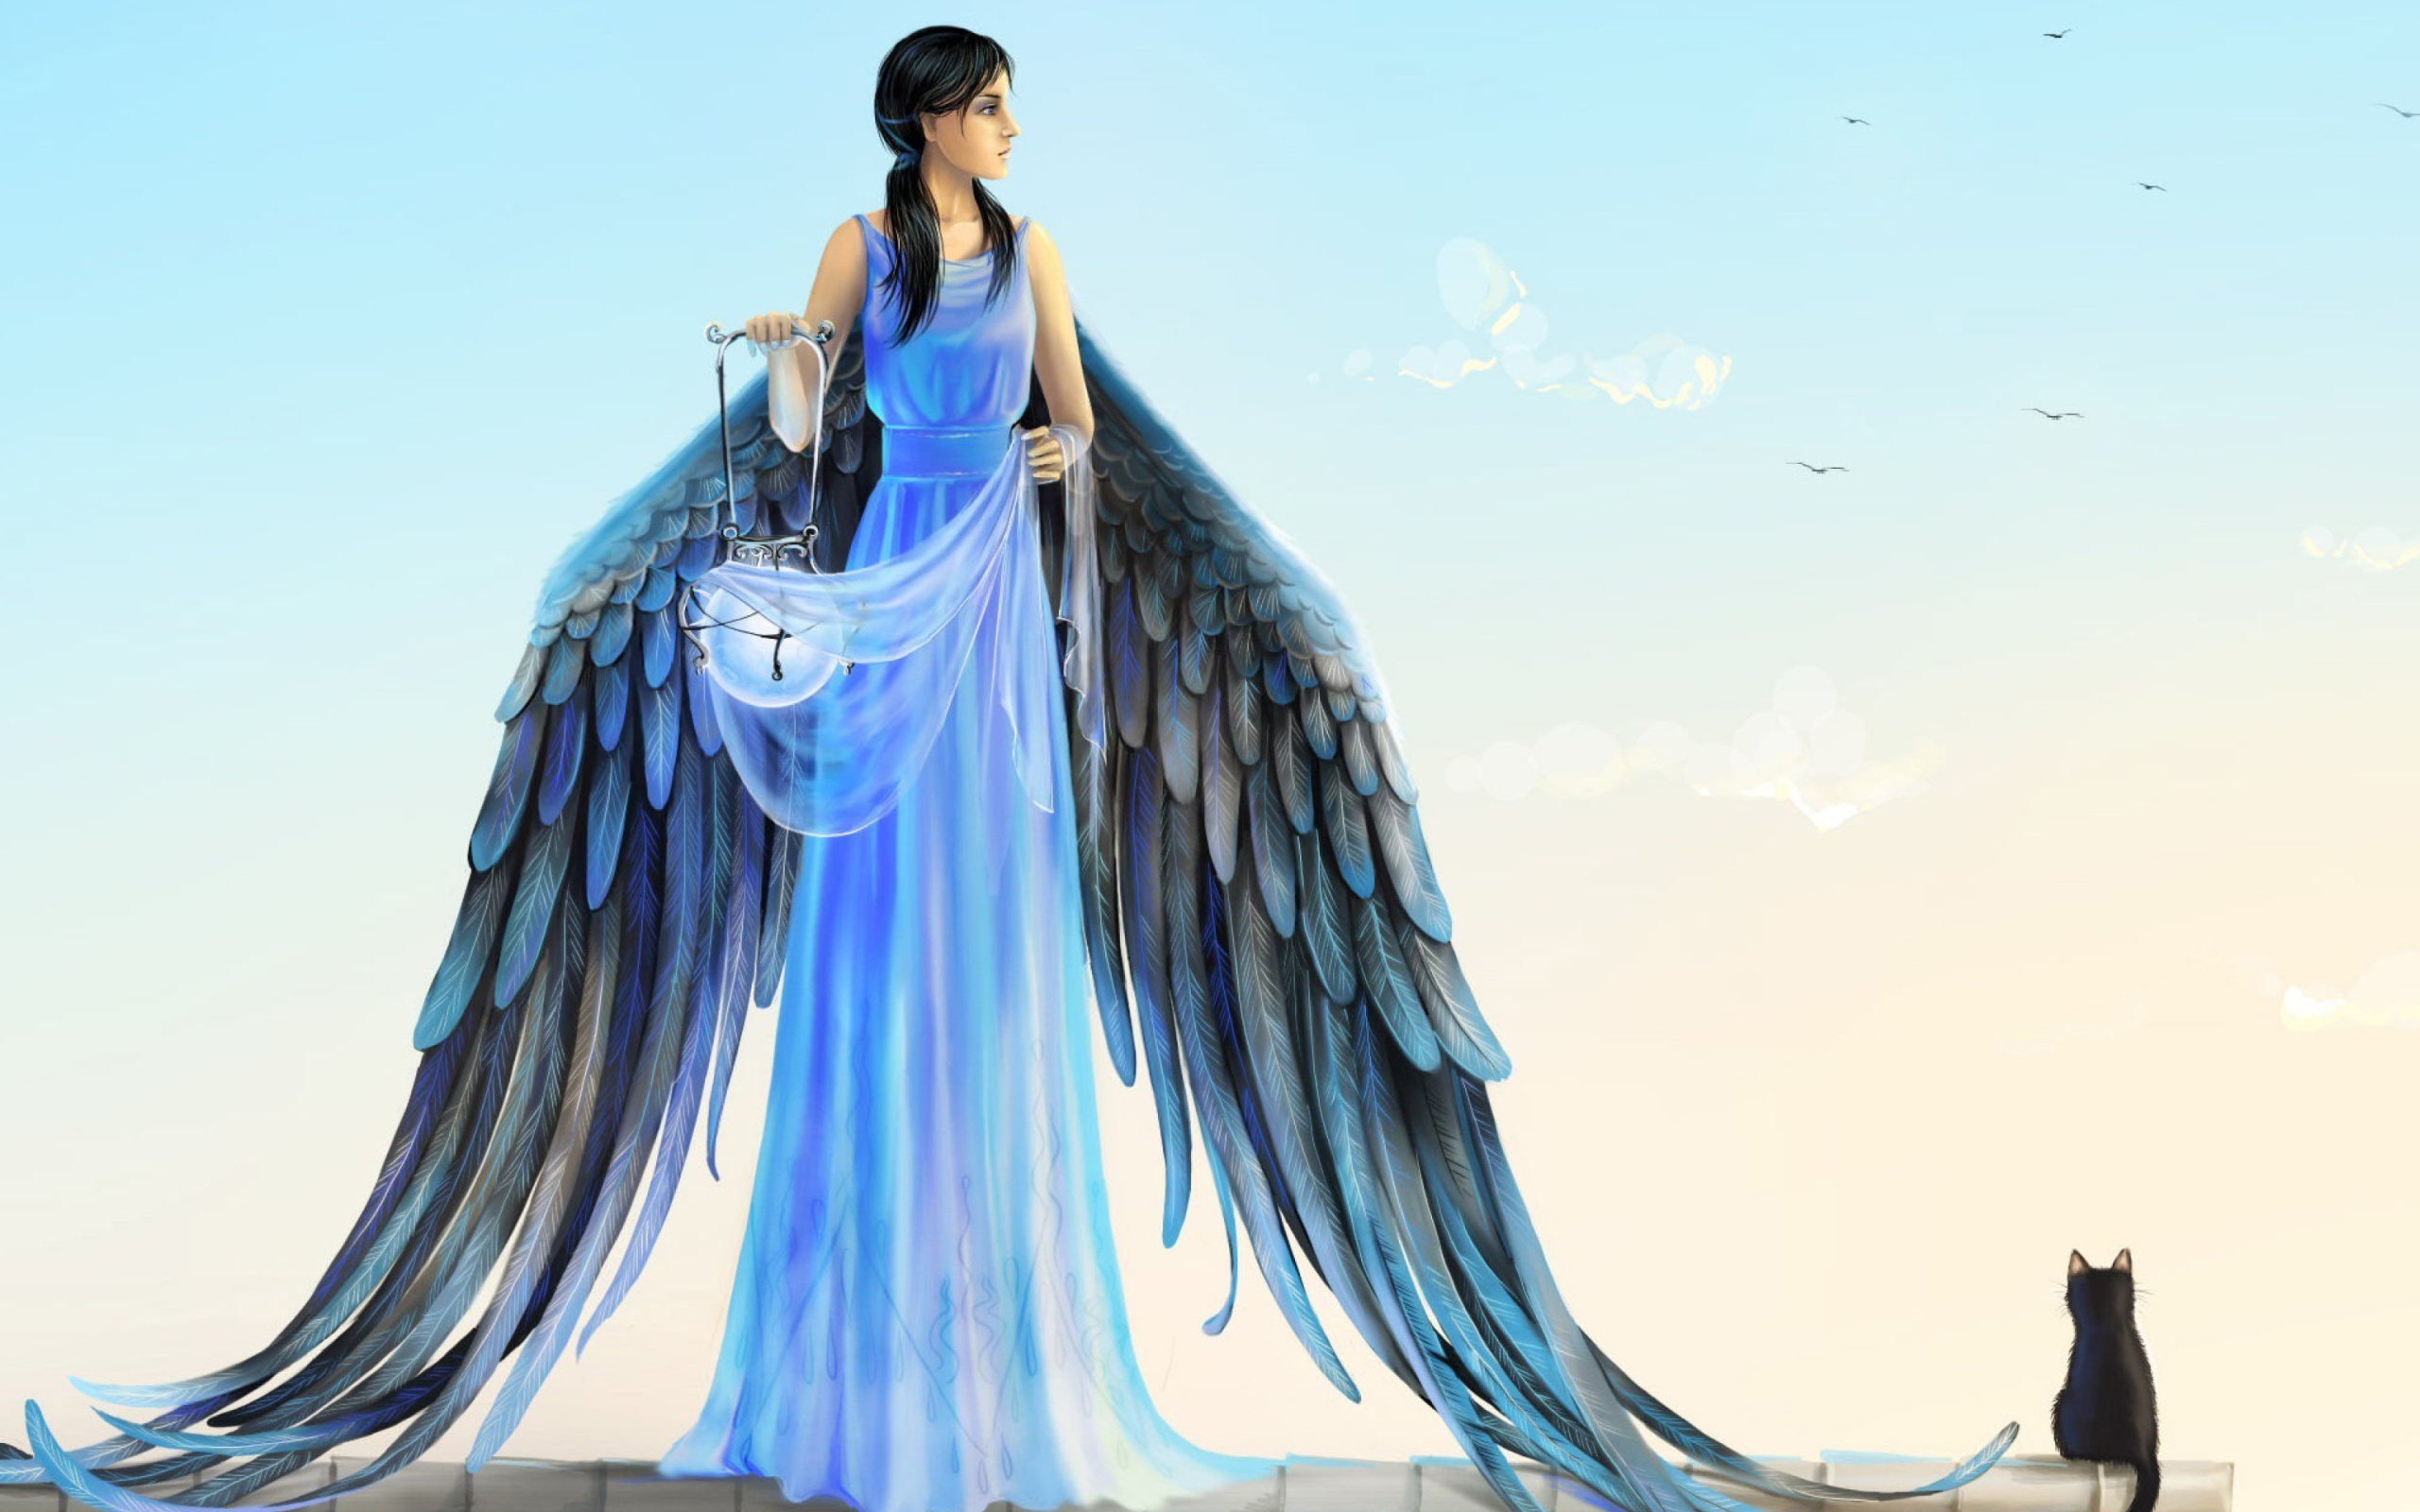 Das Angel with Wings Wallpaper 2560x1600